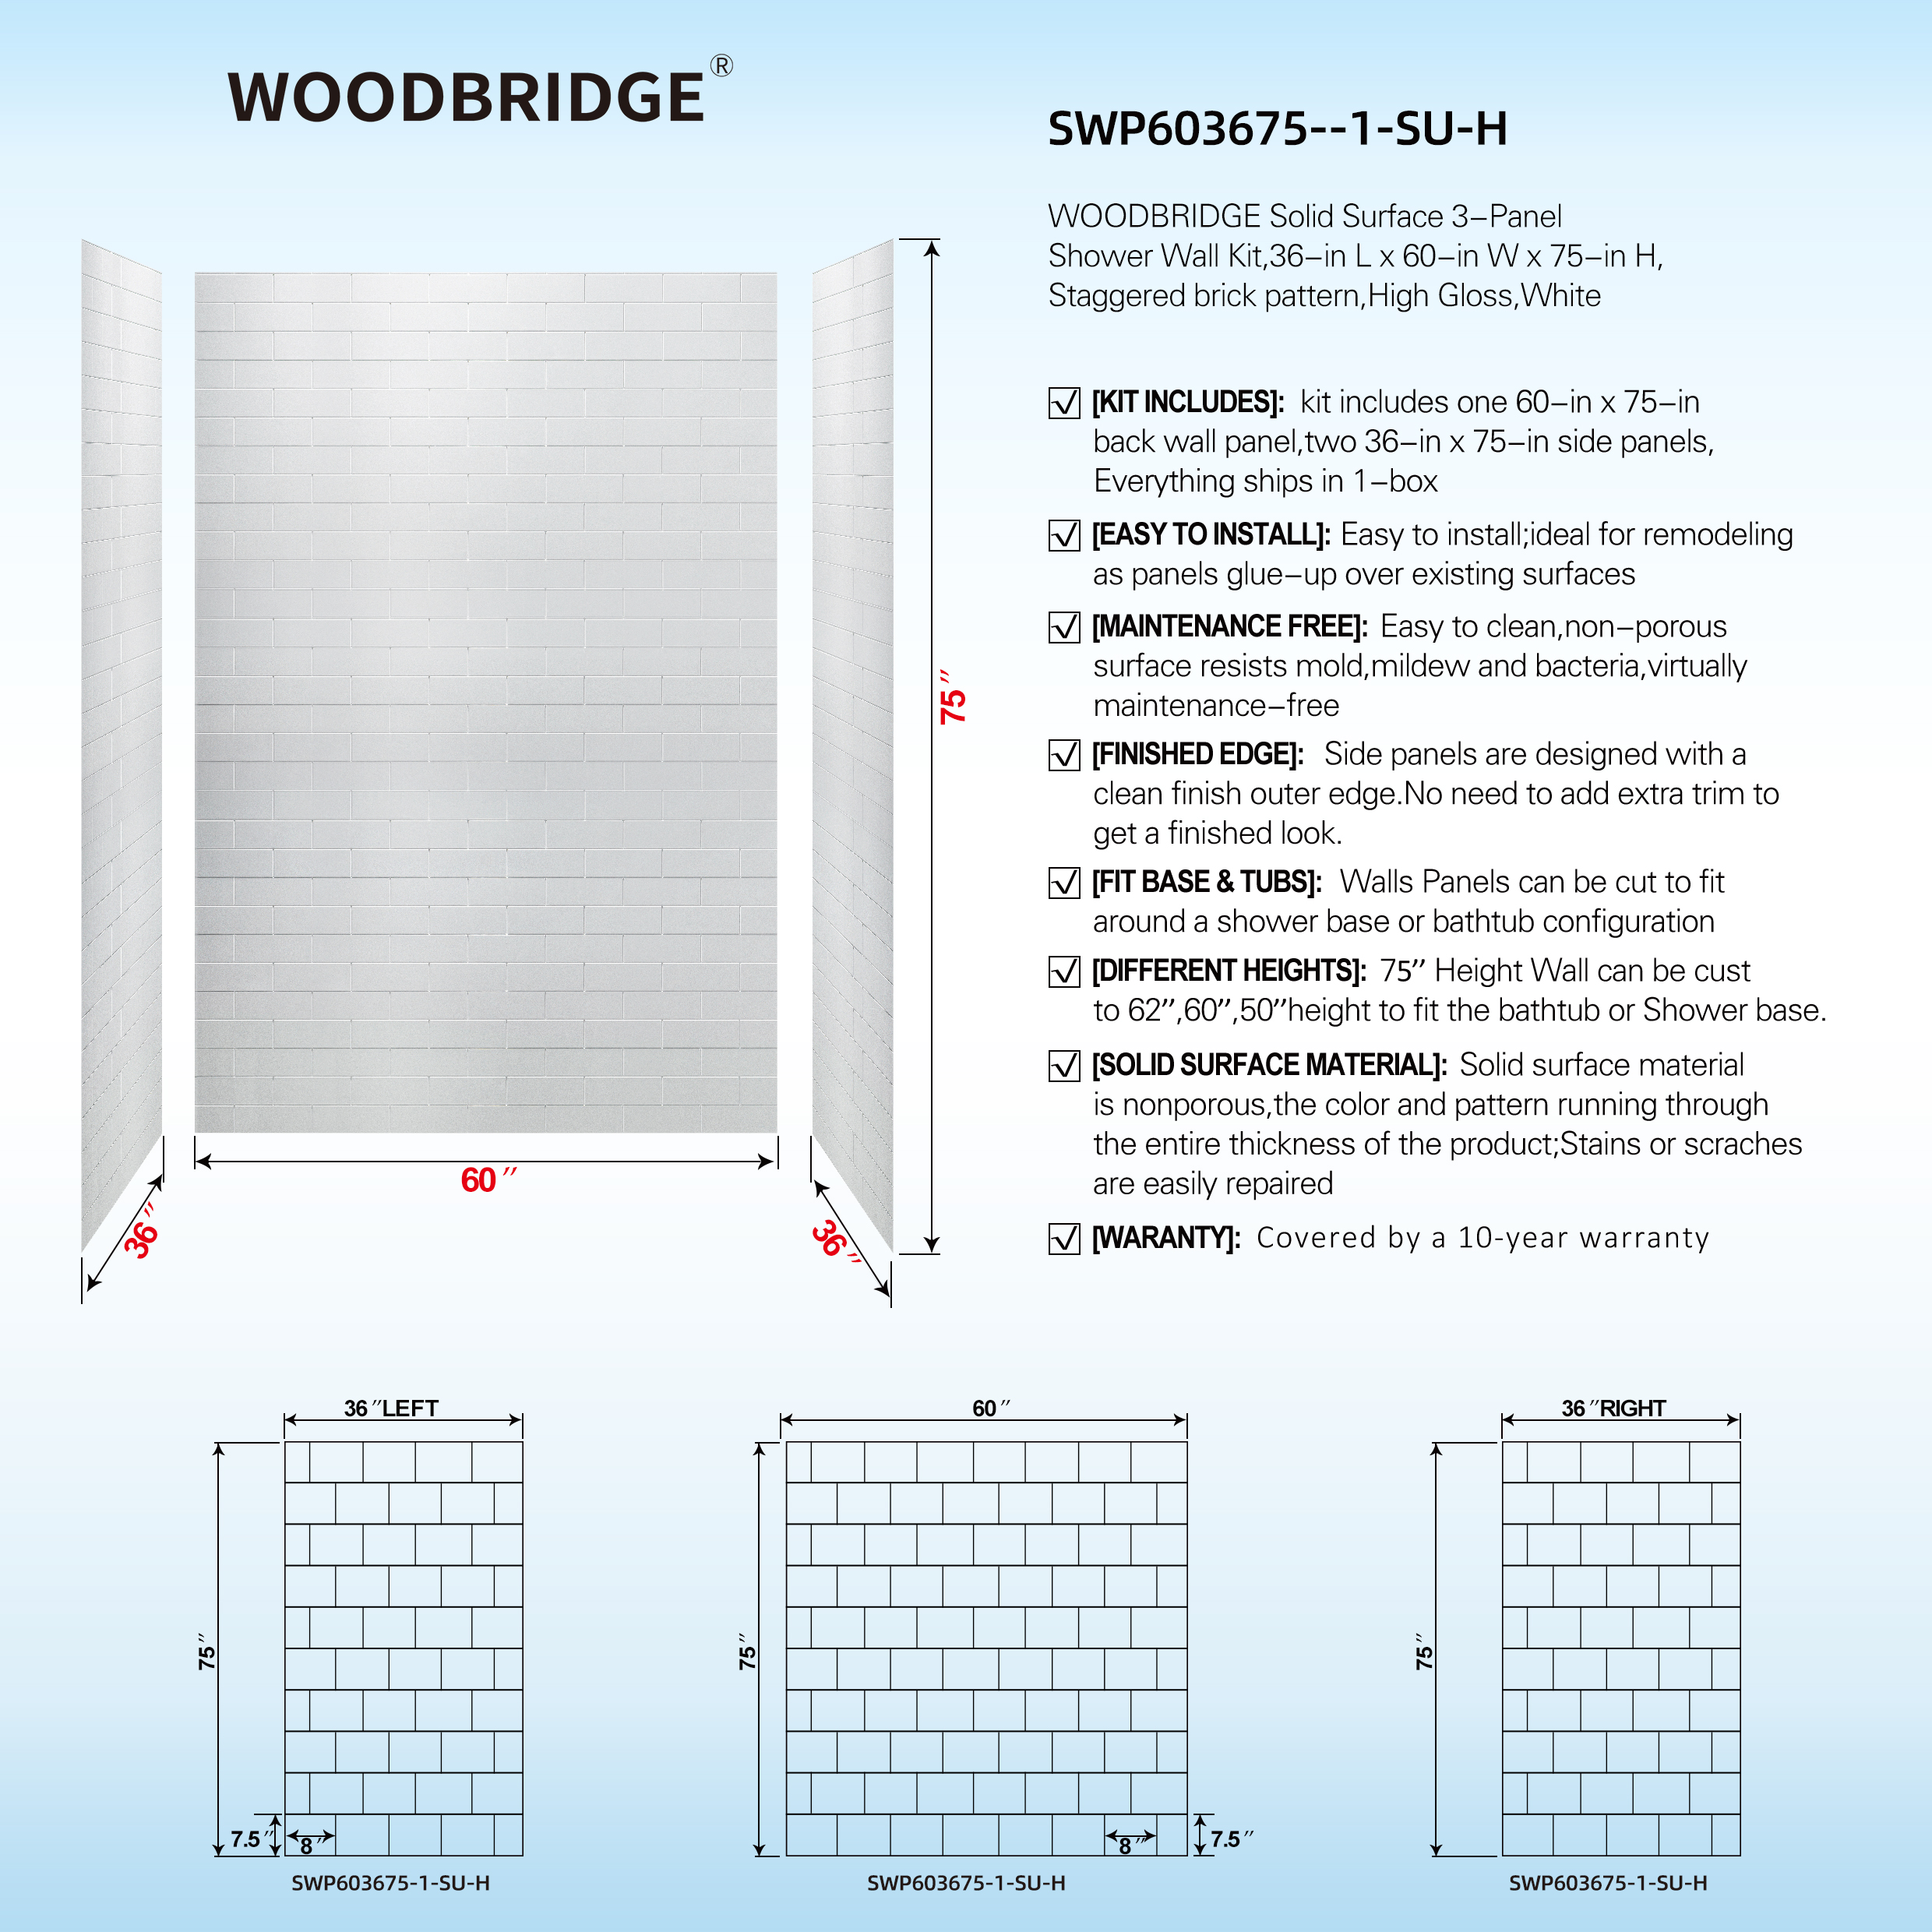  WOODBRIDGE Solid Surface 3-Panel Shower Wall Kit, 36-in L x 60-in W x 75-in H, Staggered Brick Pattern, High Gloss White Finish_11707